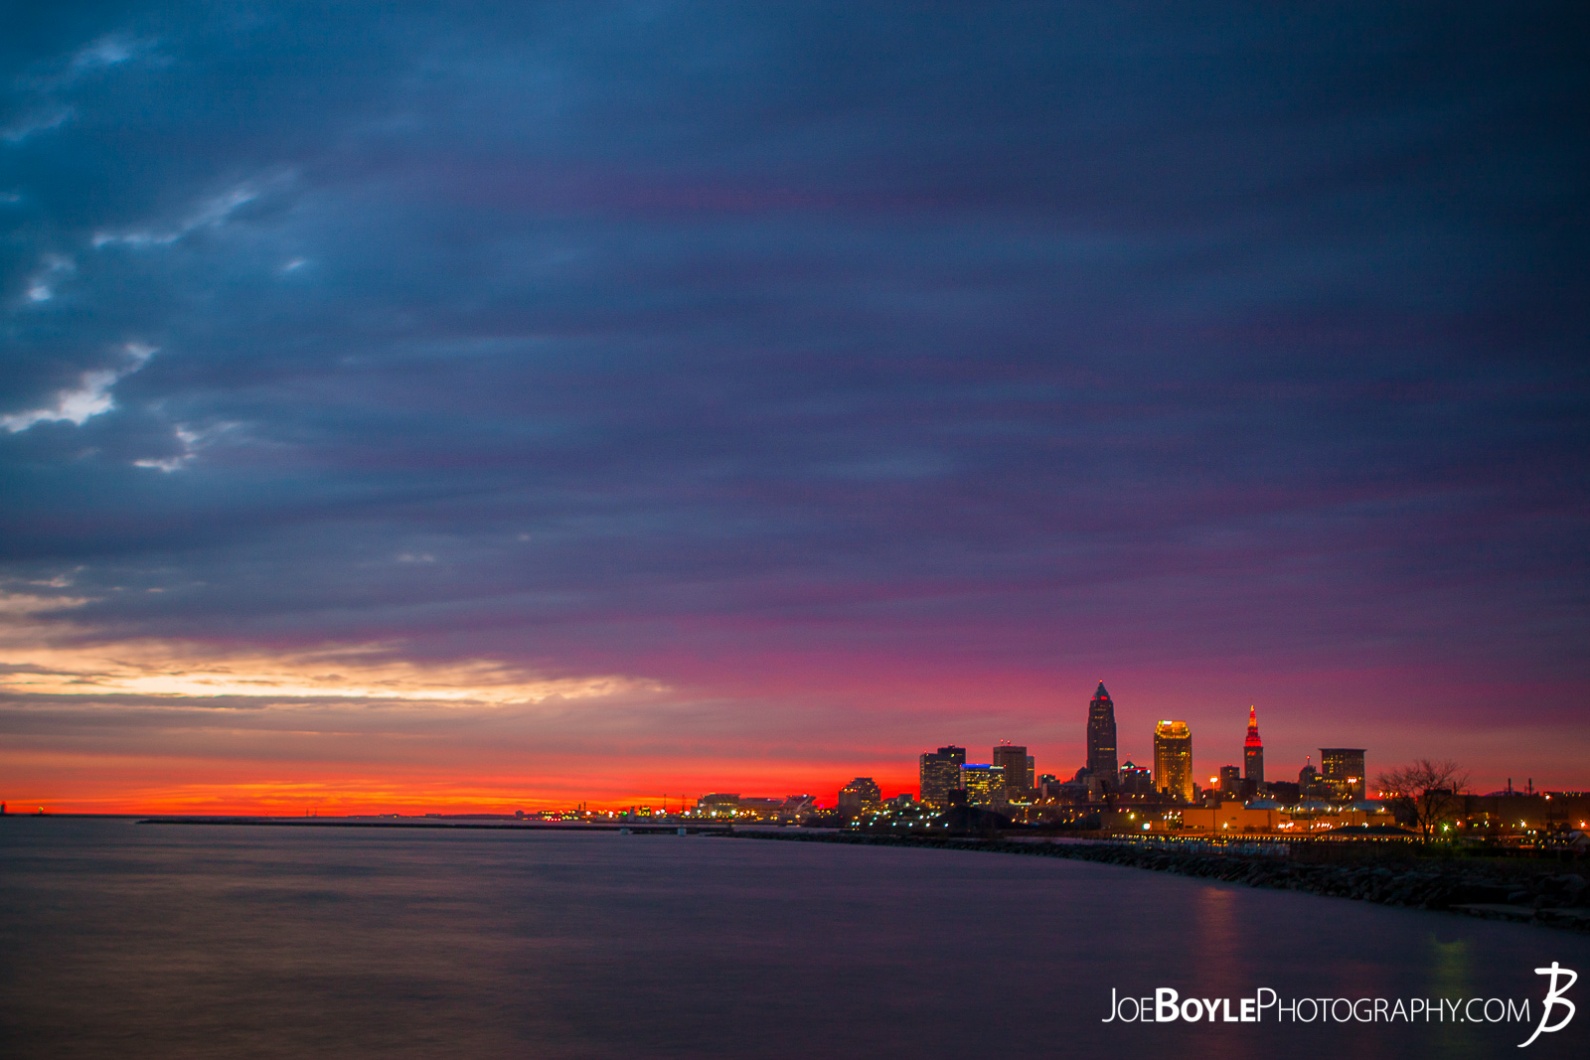 Here is a beautiful Cleveland Sunrise taken from Edgewater Park over Lake Erie!